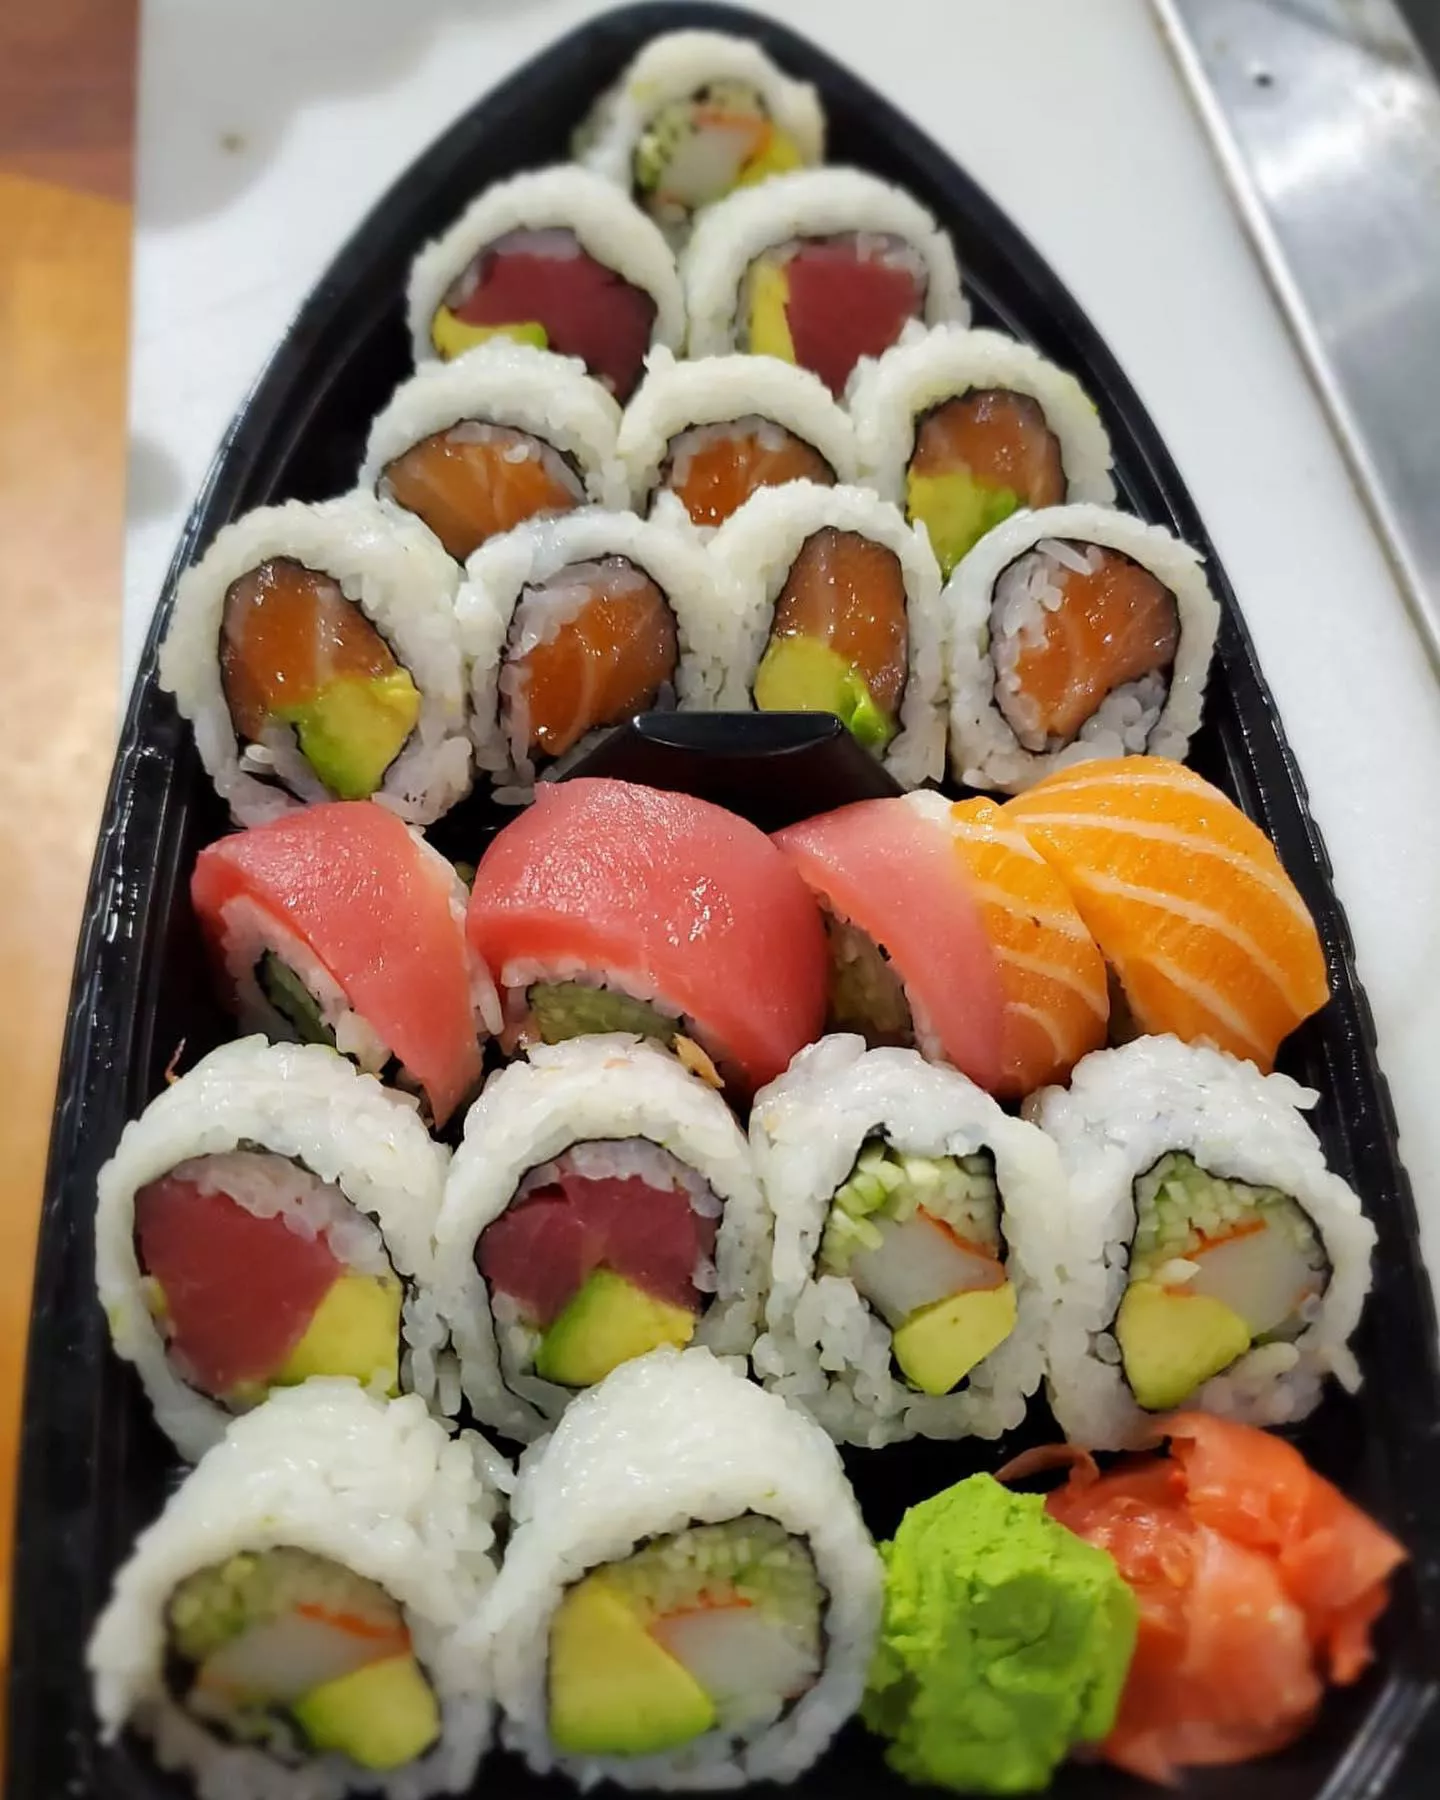 Simply Sushi  Crown heights Empire Kosher